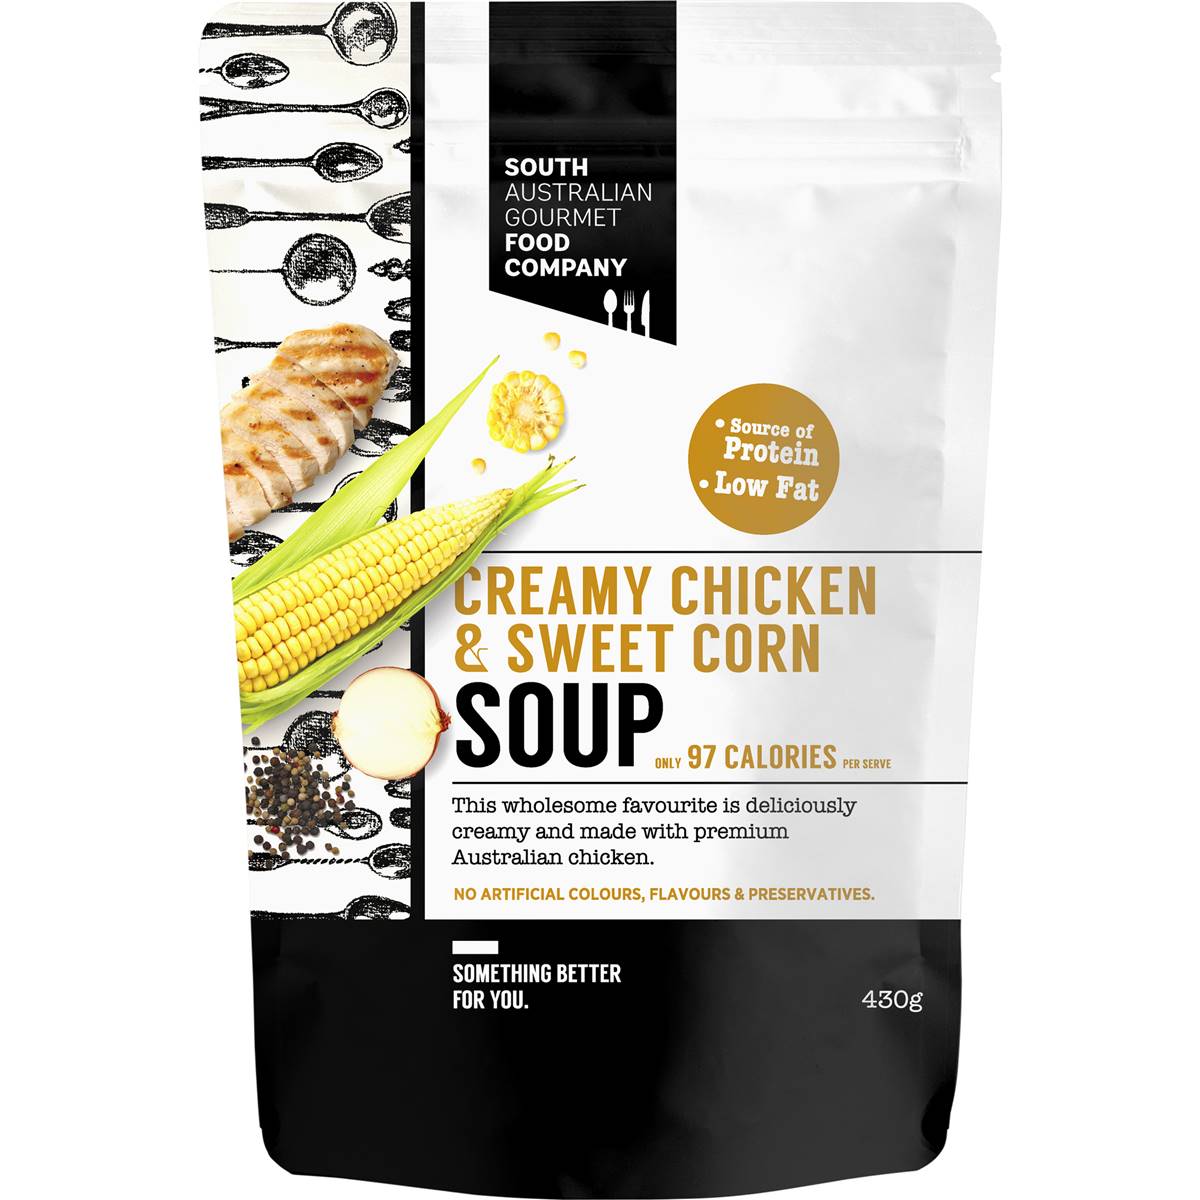 Calories in Sa Gourmet Food Co Creamy Chicken & Sweet Corn Soup